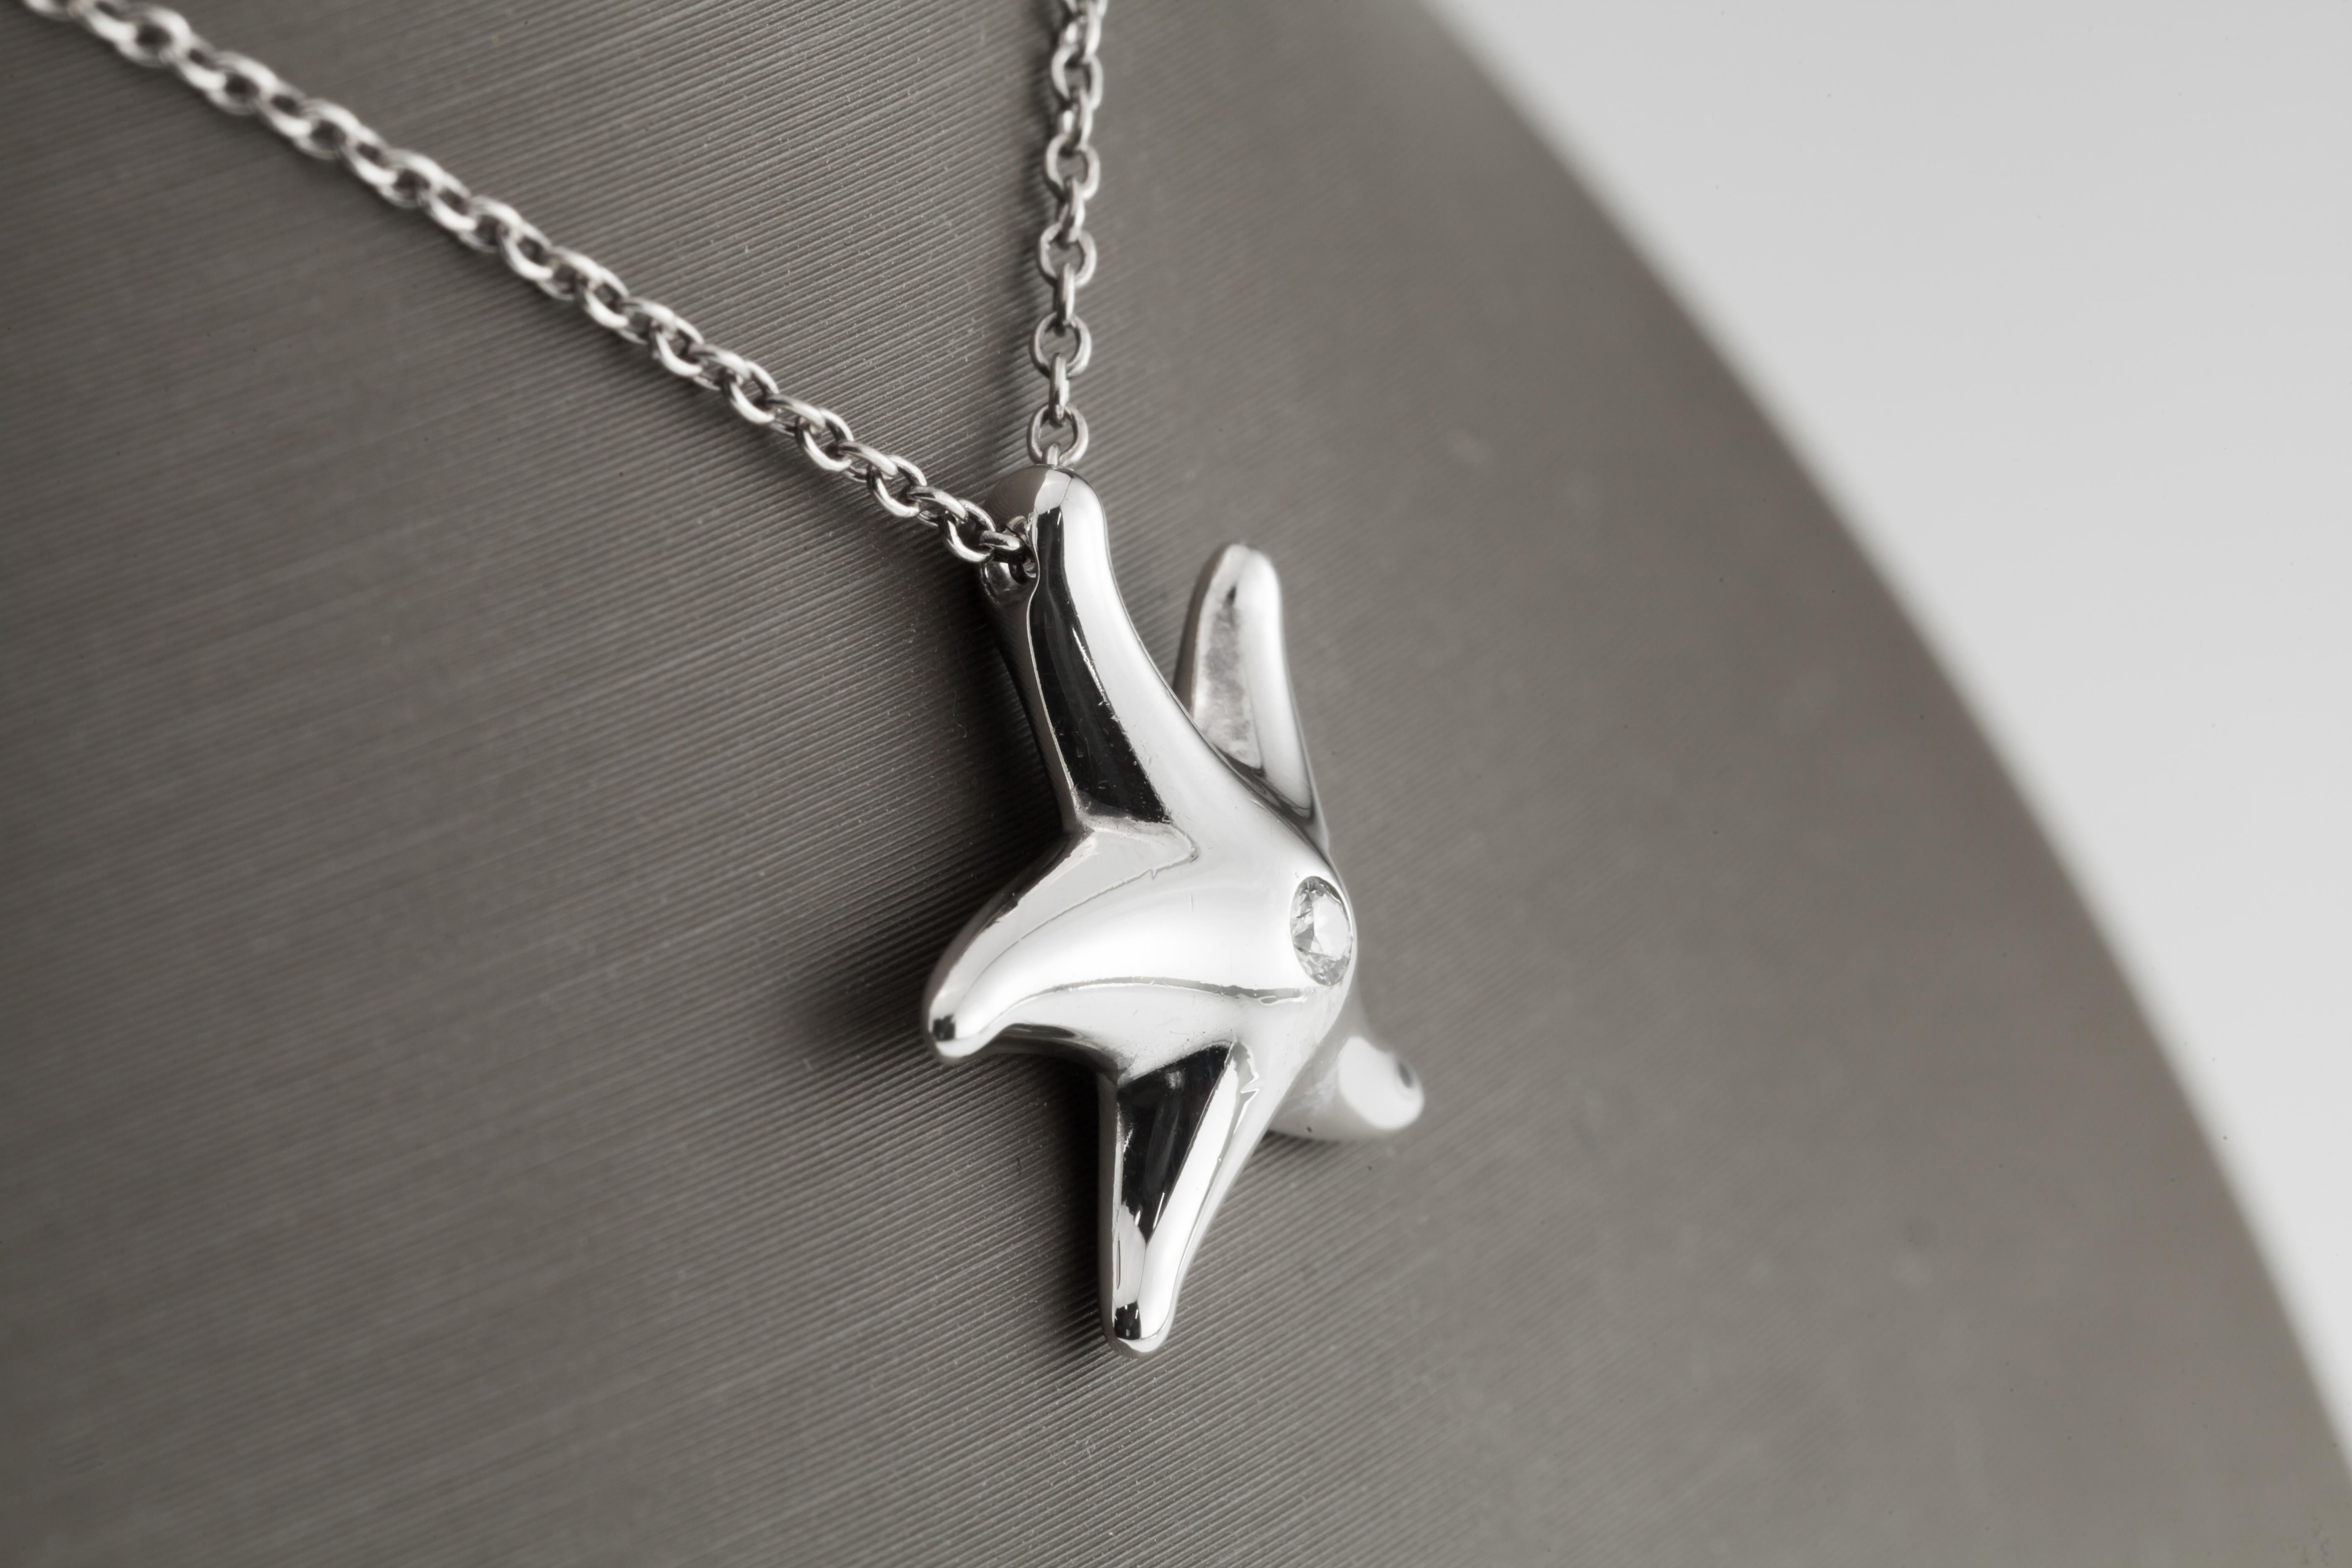 tiffany and co starfish necklace